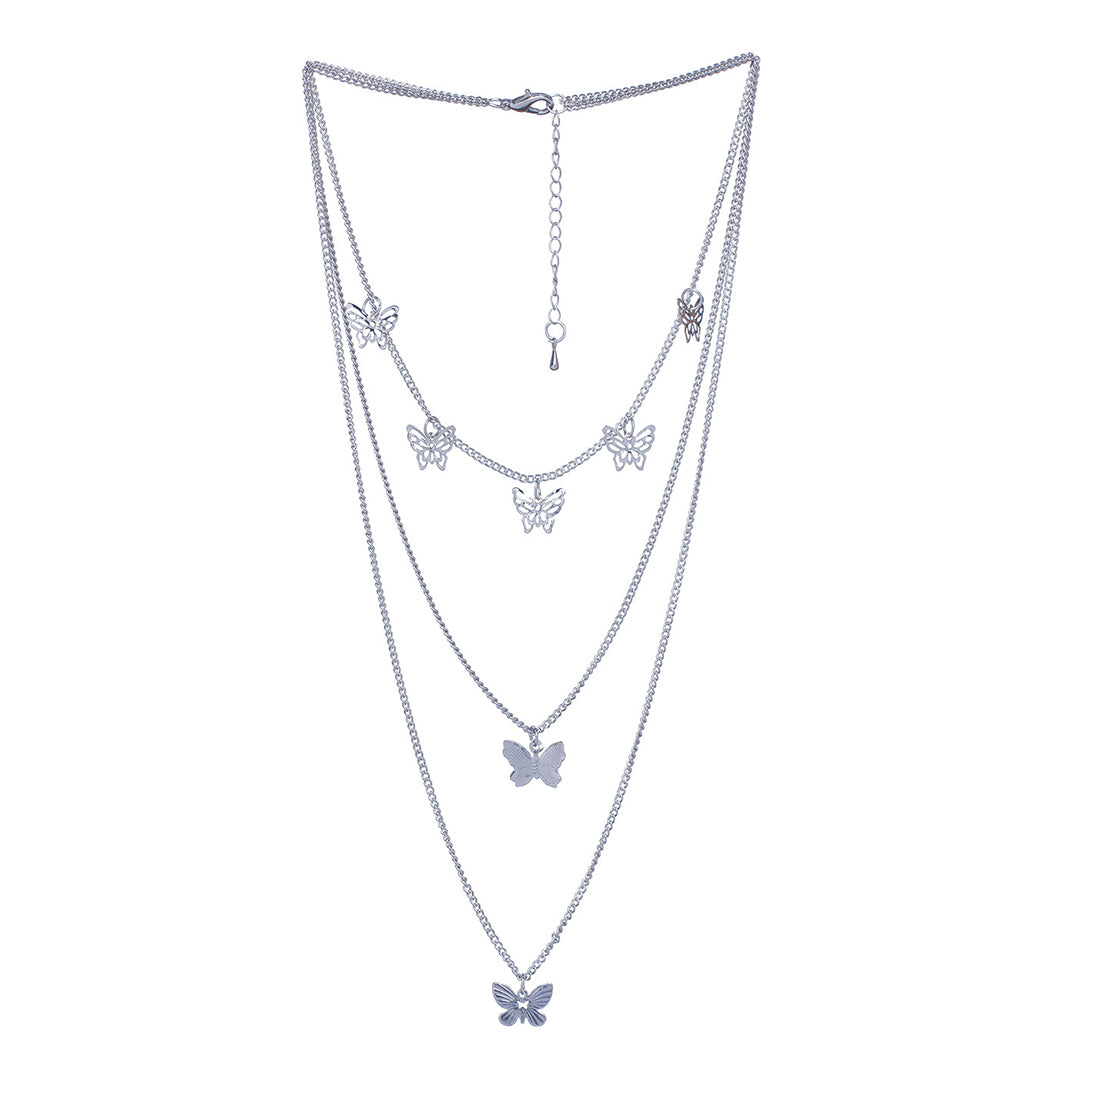 Triple Layer Silver Necklace - Multiple Flying Butterflies